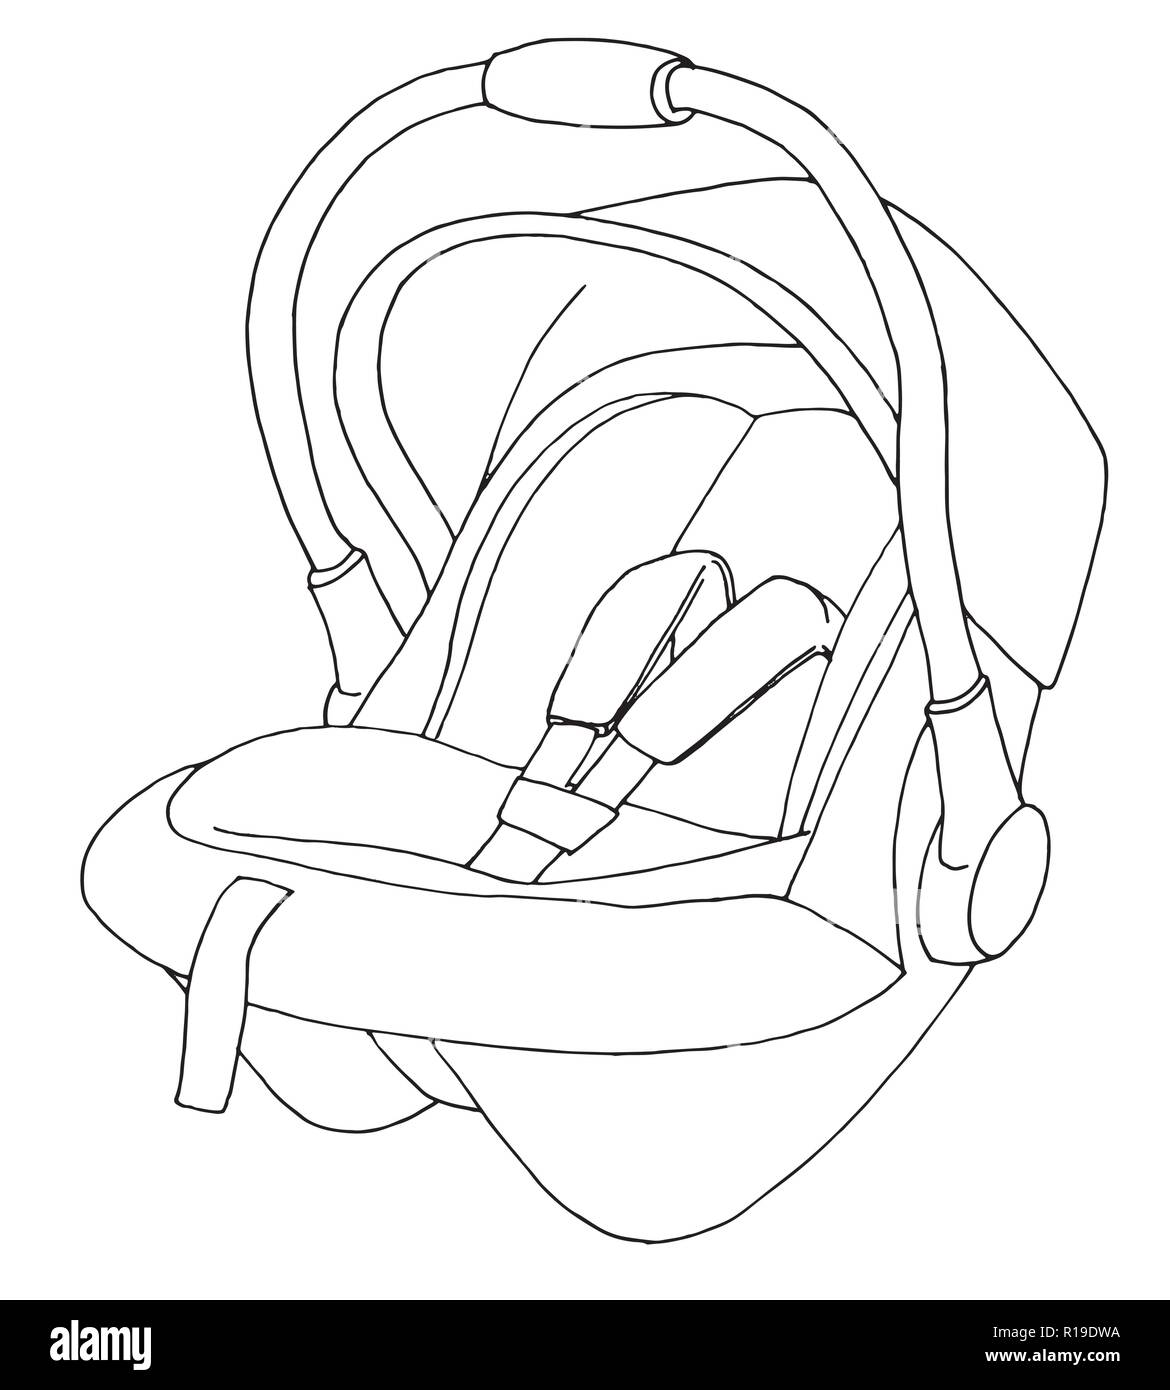 Sketch of a children's car seat. Child safety. Vector illustration Stock Vector